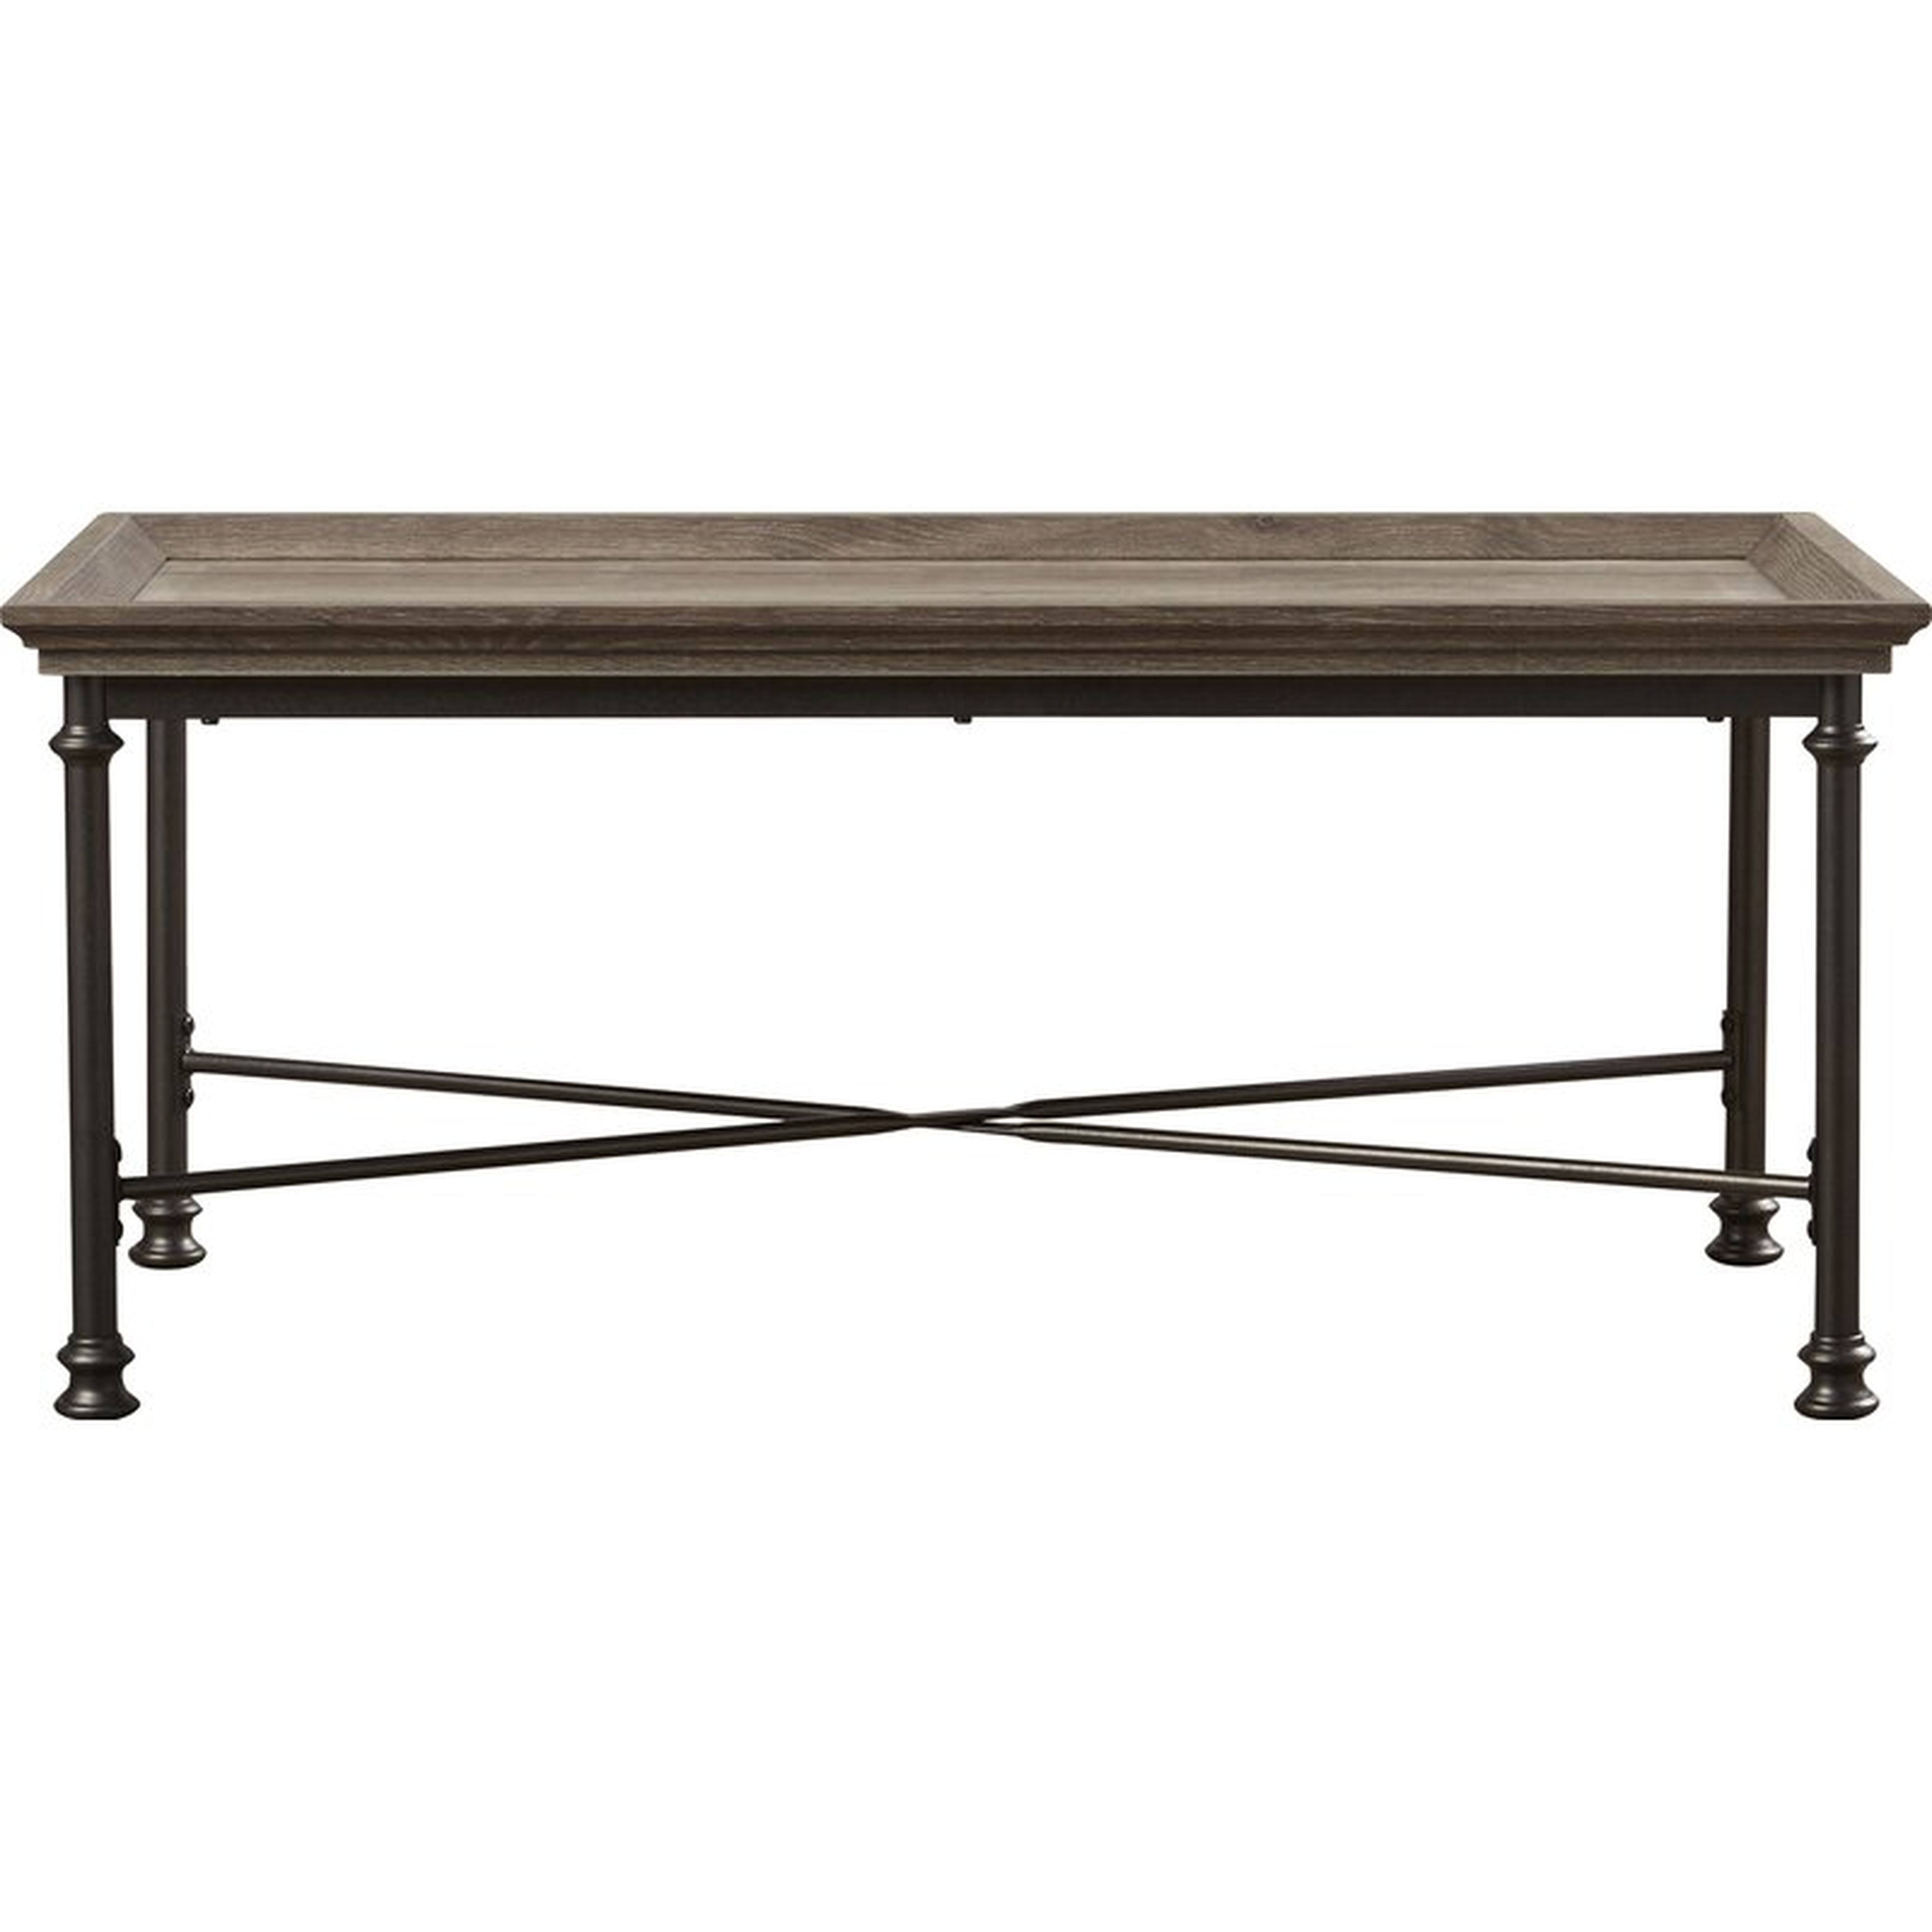 Gayle Coffee Table with Tray Top - Birch Lane